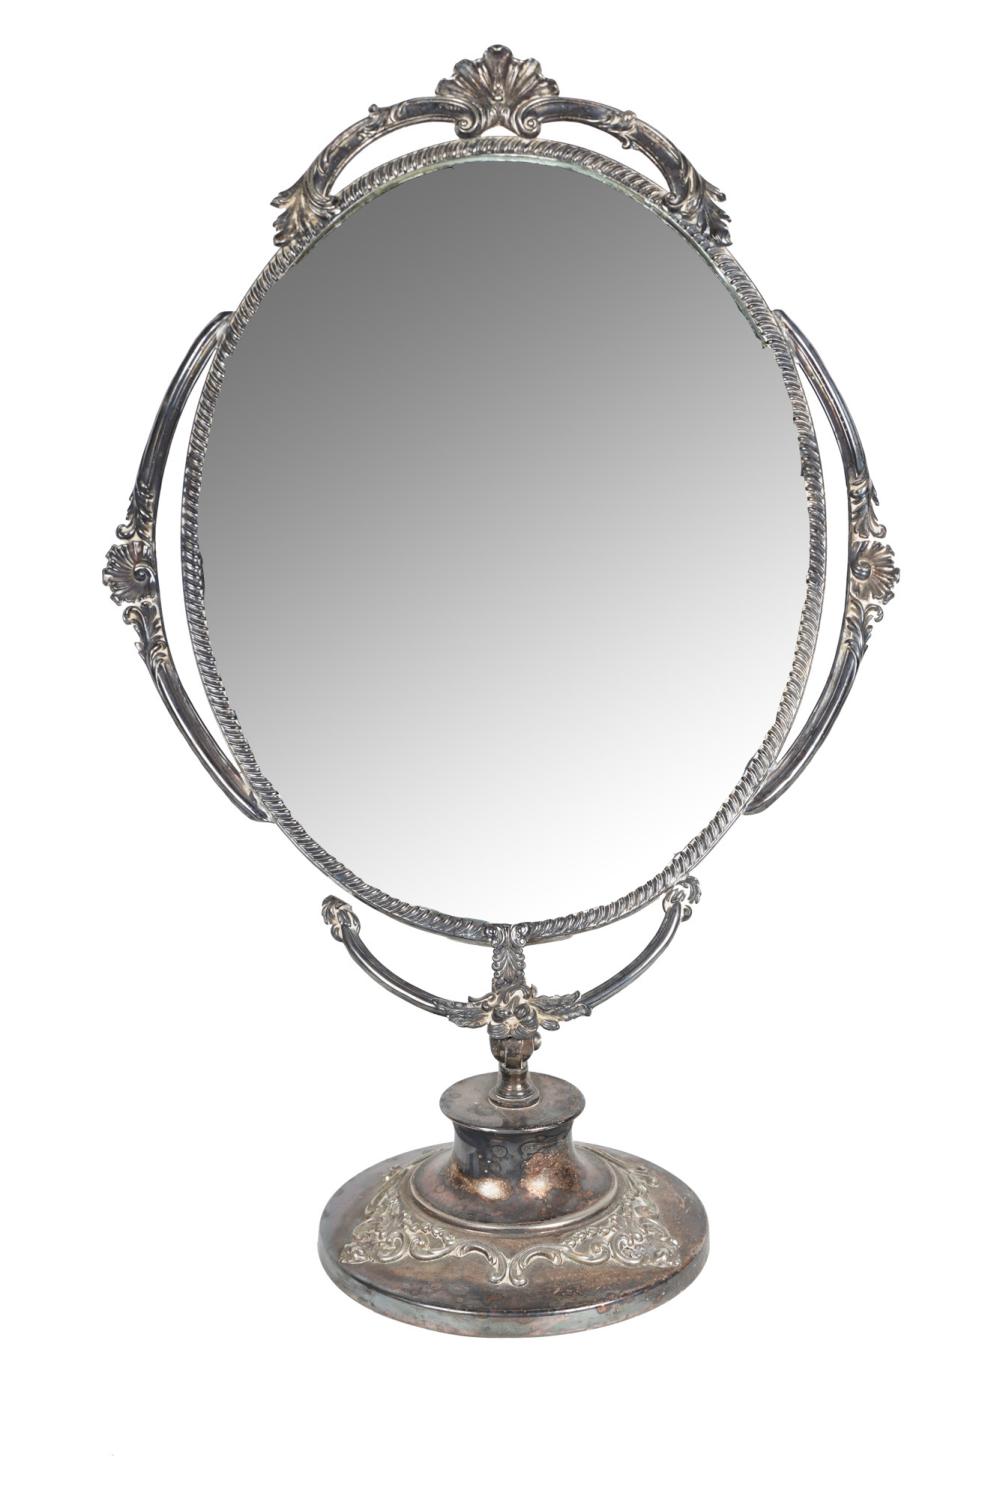 SILVERPLATED TABLE MIRRORwith adjustable 336195